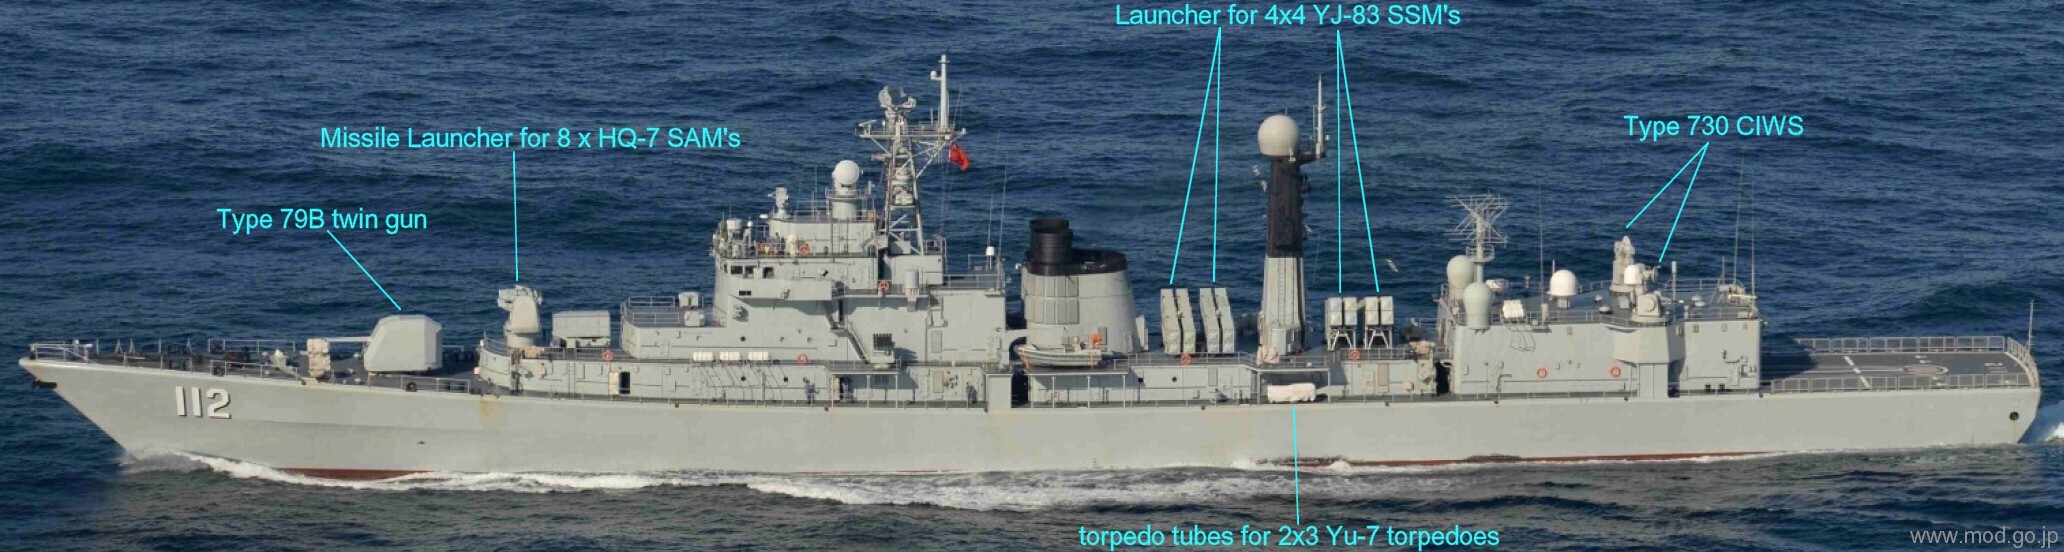 type 052 luhu class guided missile destroyer china plan peoples liberation army navy 02a armament sam ssm ciws gun